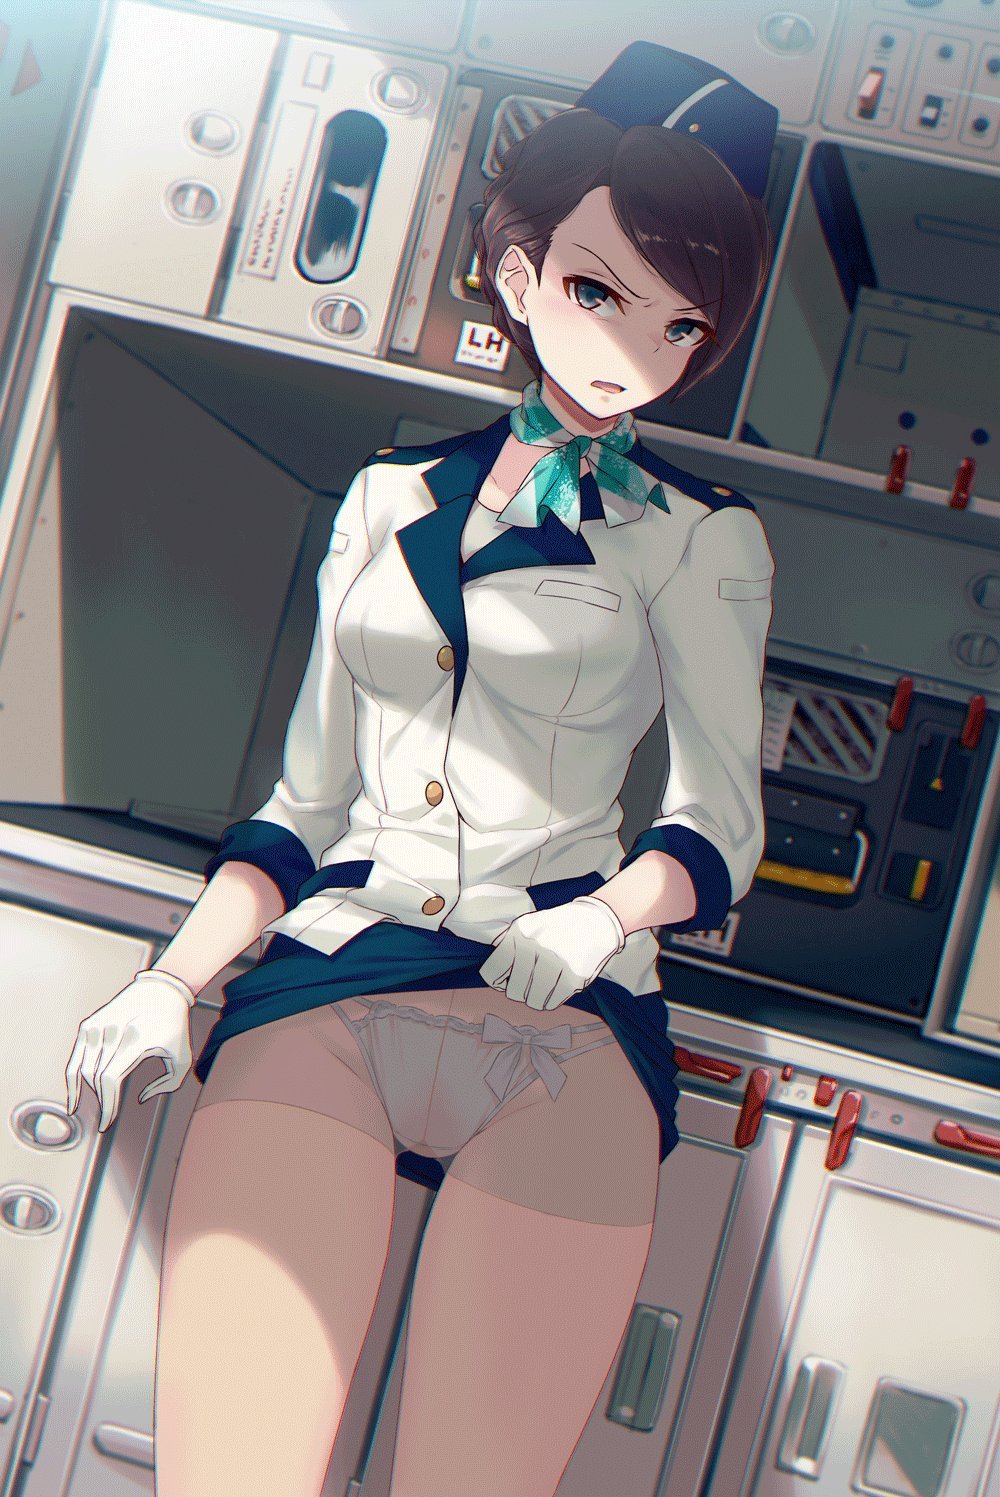 "Now, please return to your seat..." [Original]